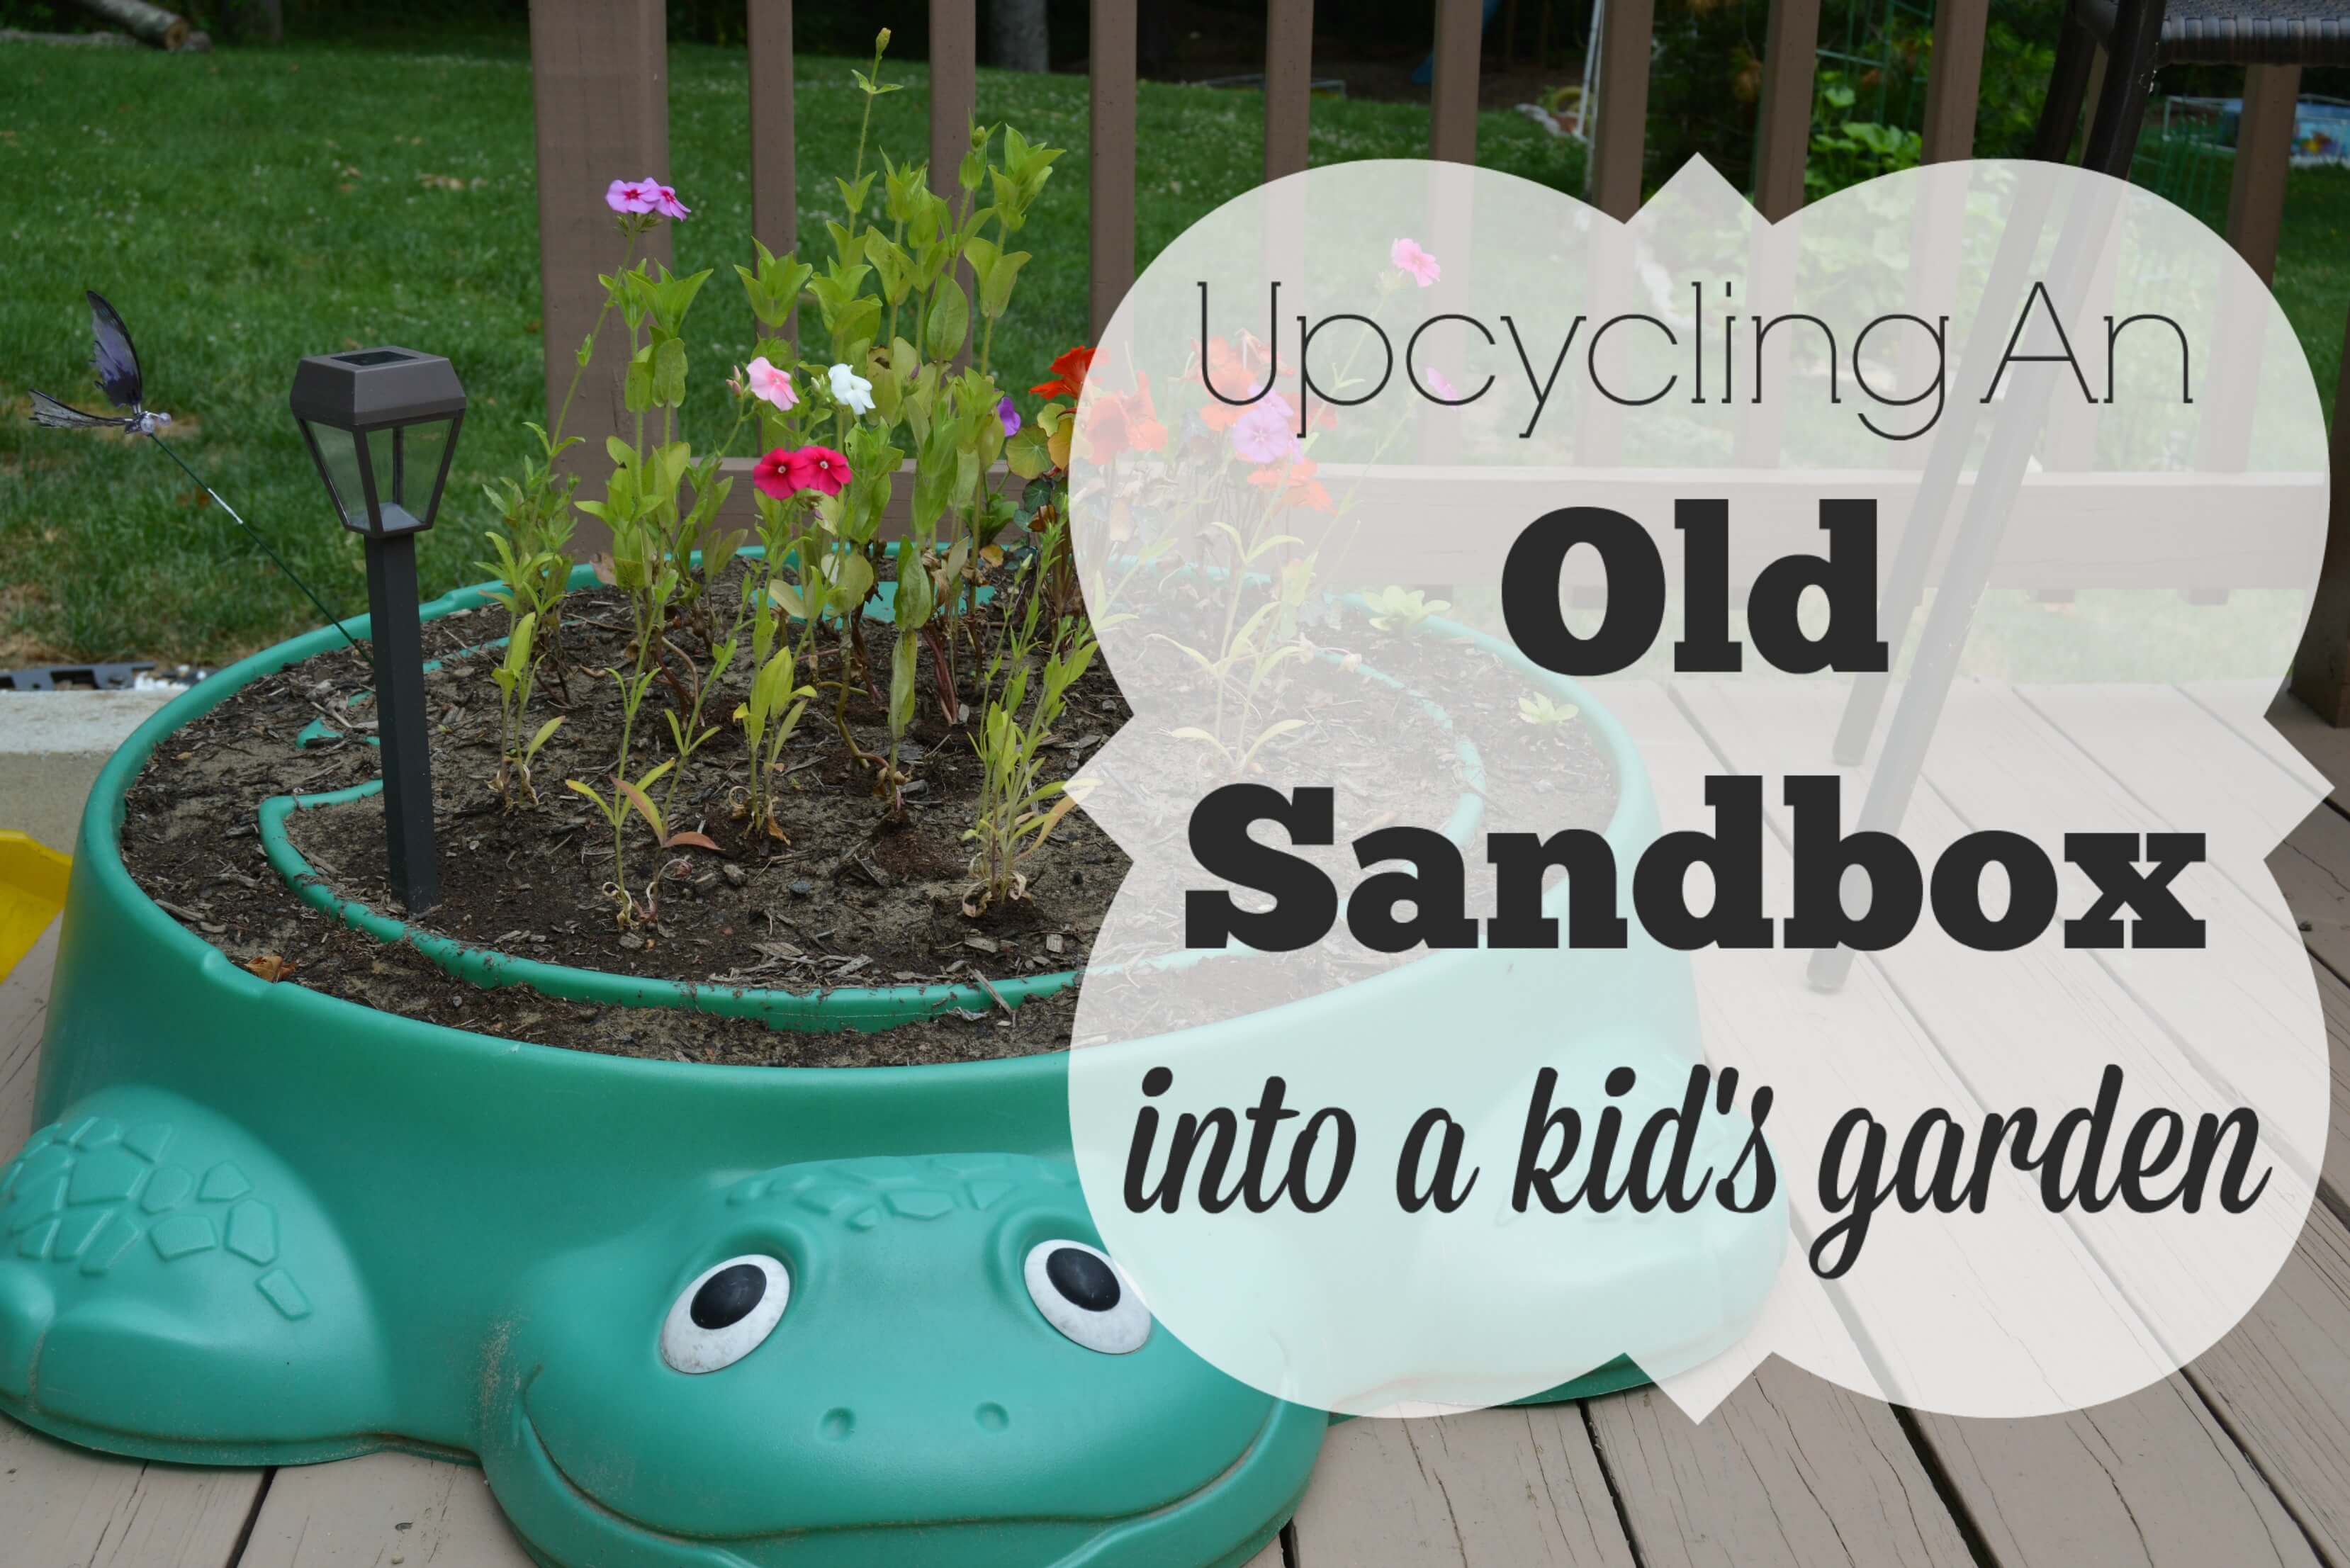 Do you have an old plastic sandbox lying around that your kids have outgrown? Don't toss it. Upcycle it into an adorable kid's garden!